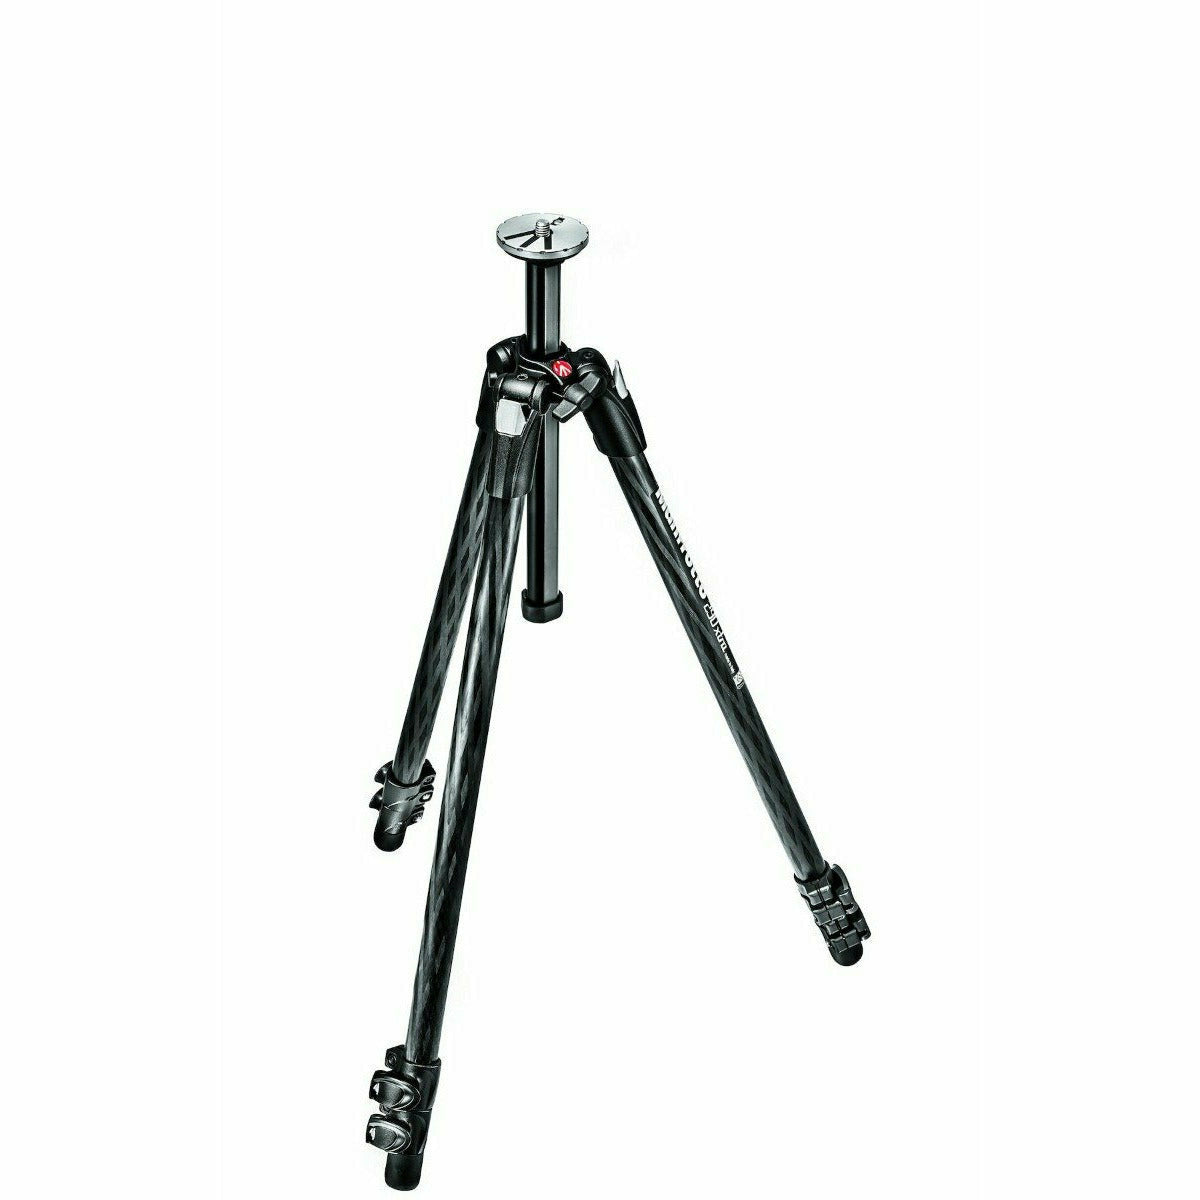 Manfrotto Tripod 290 Series Xtra CF 52.7-165.5cm 5kg Payload - Dragon Image